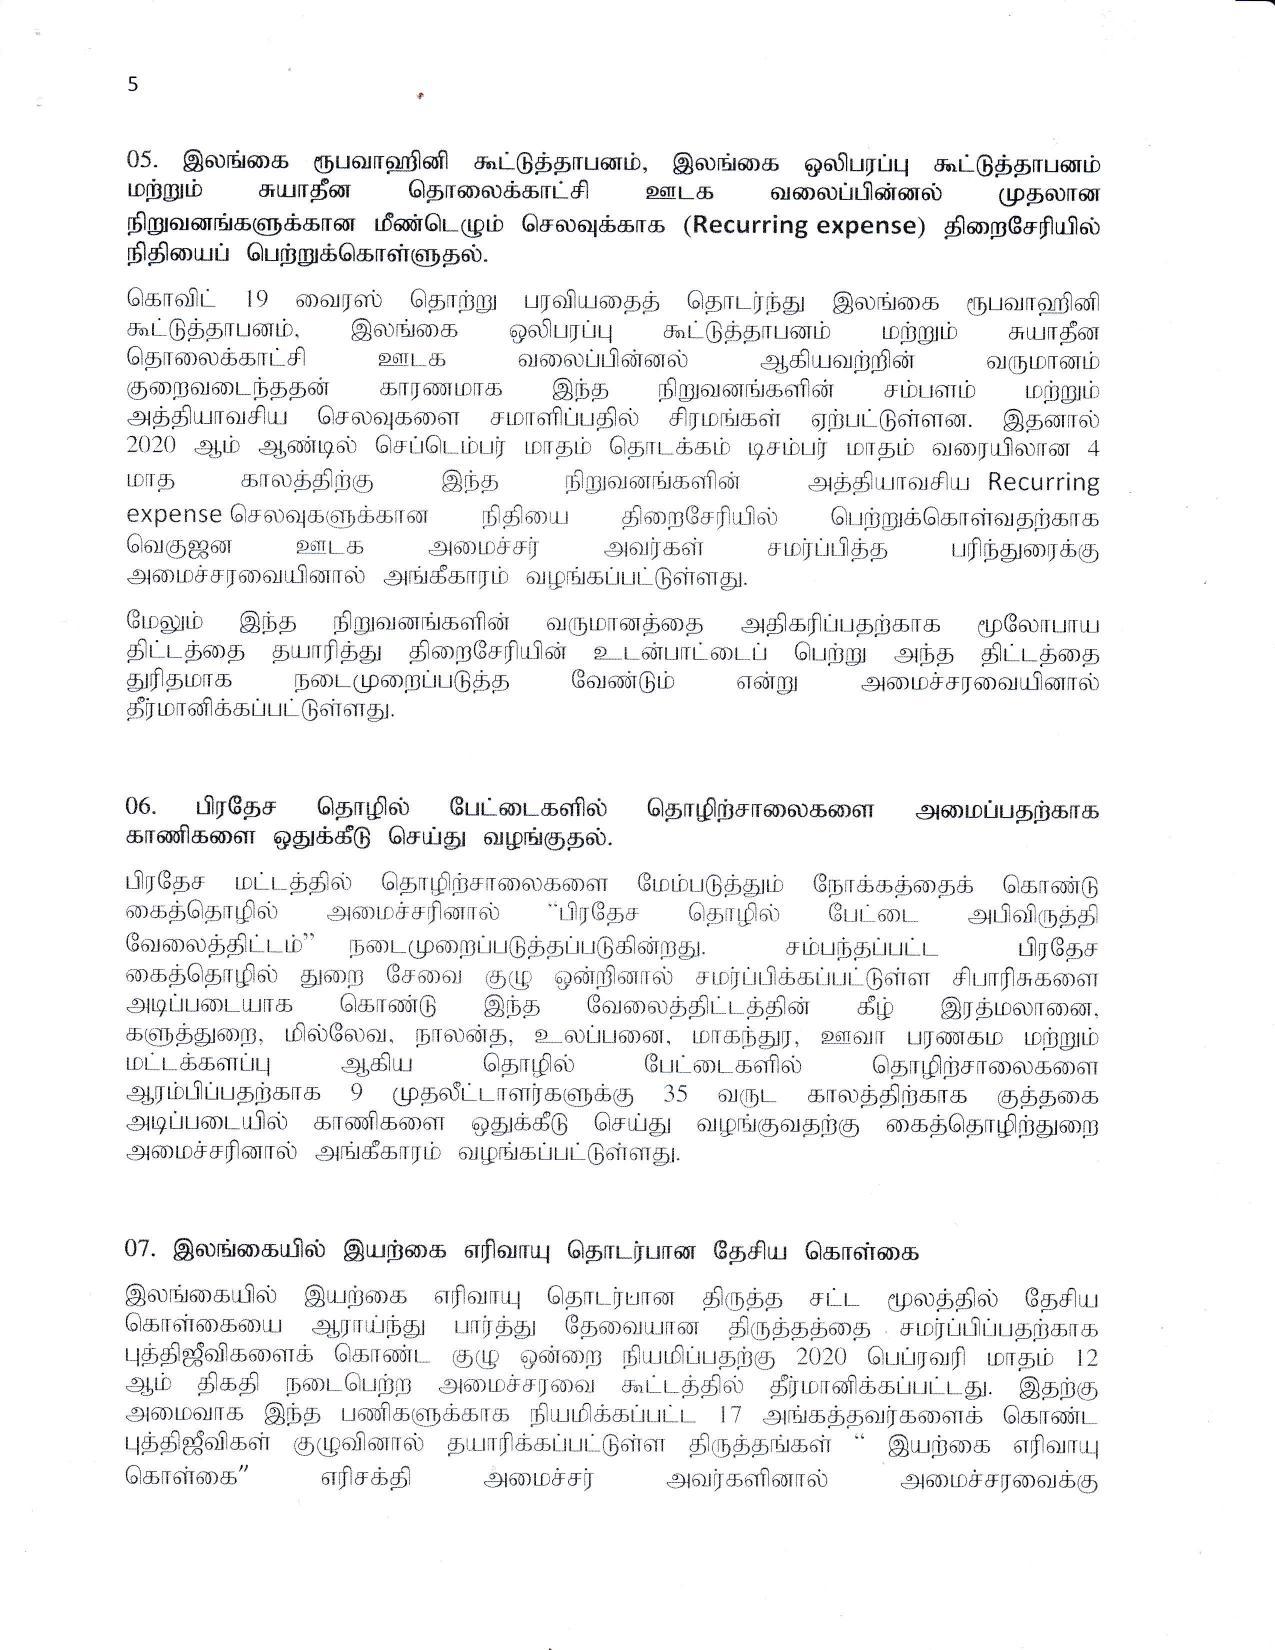 Cabinet Decision on 02.09.2020 Tamil min page 005